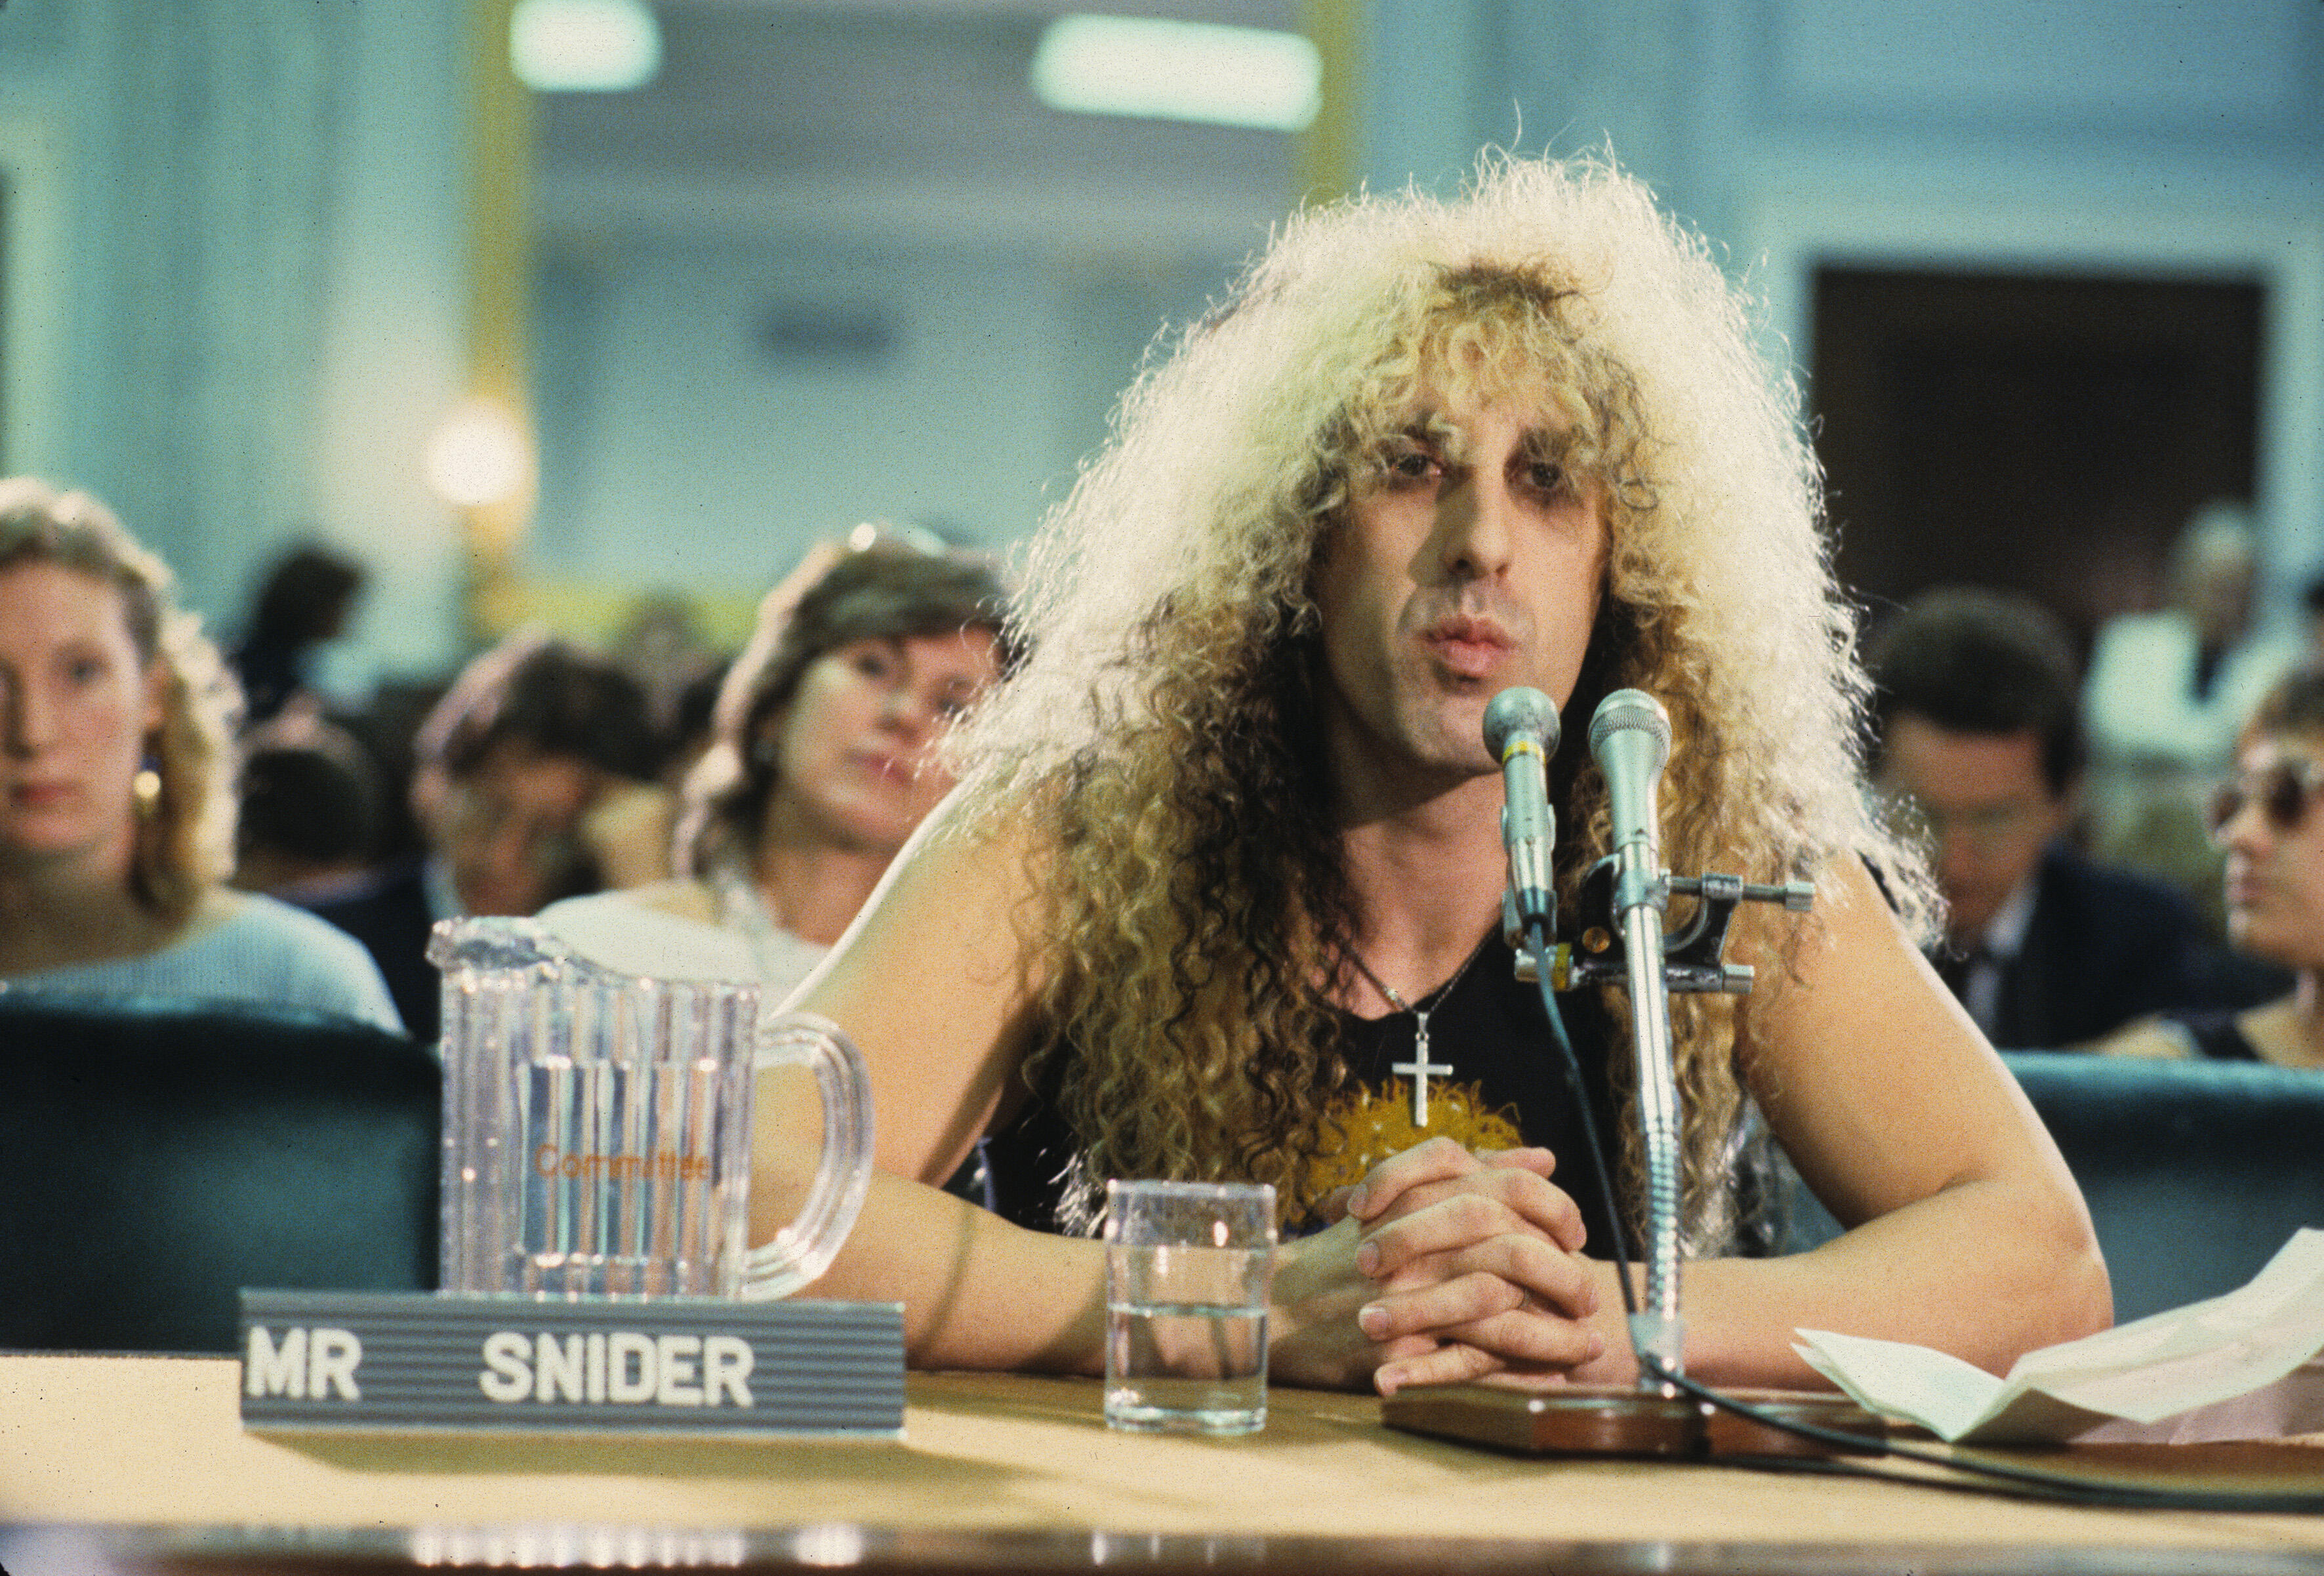 There's Now A Graphic Novel About Dee Snider's Iconic PMRC Testimony